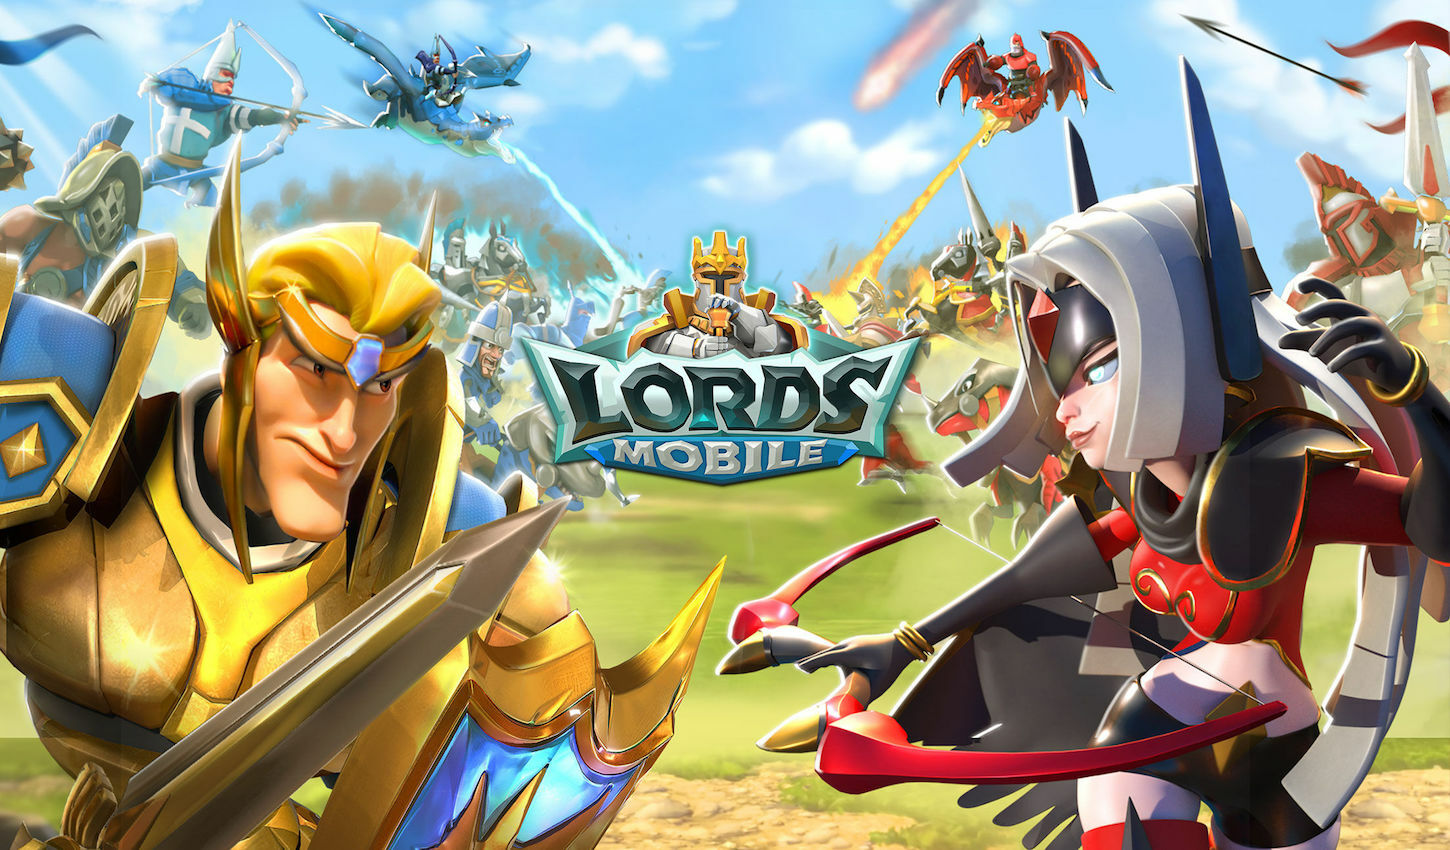 Valid Lords Mobile Codes List 